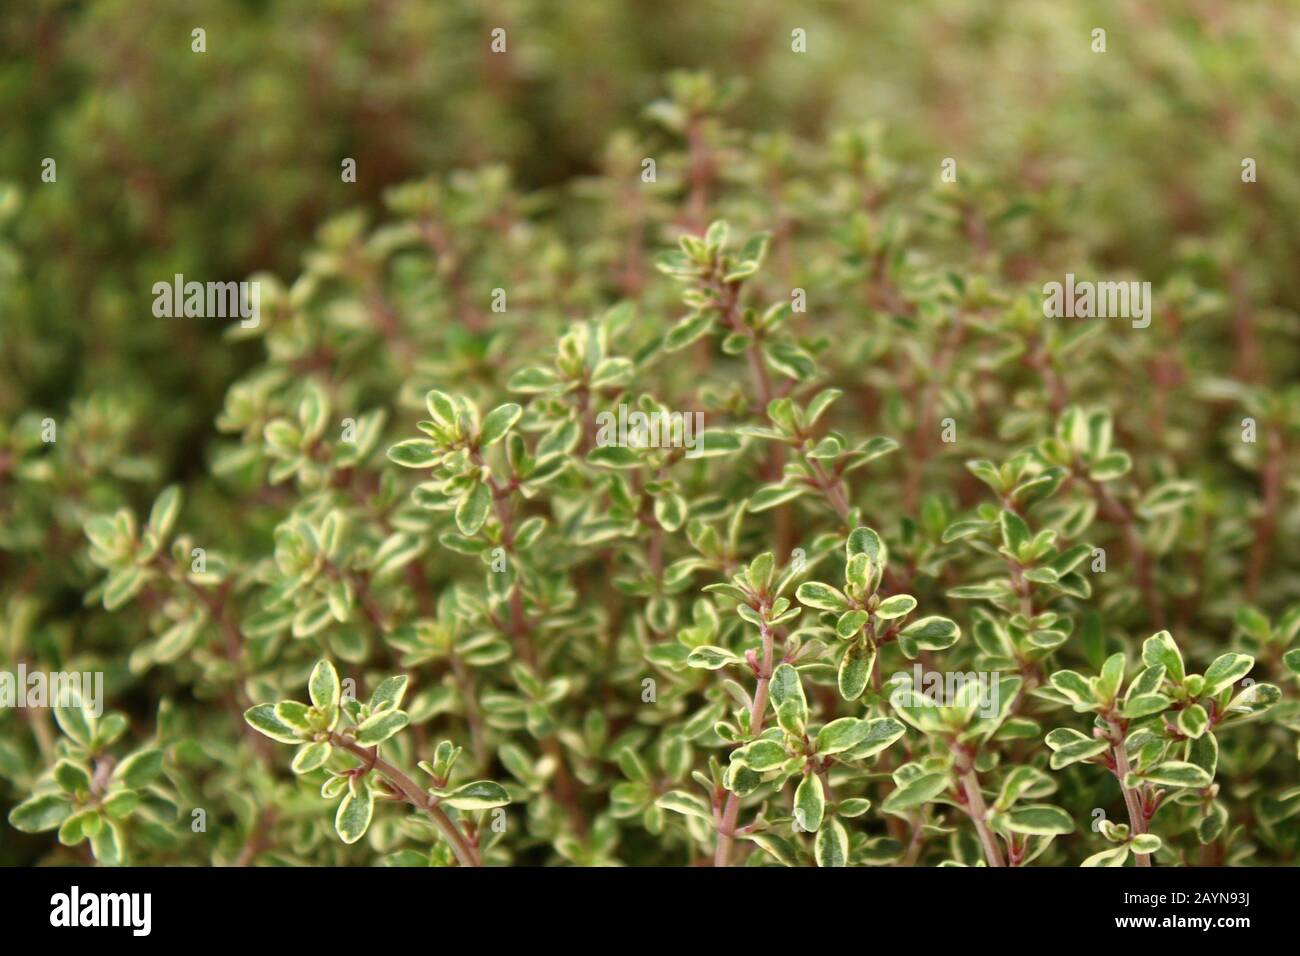 The Picture Shows A Field Of Thyme In The Garden Stock Photo